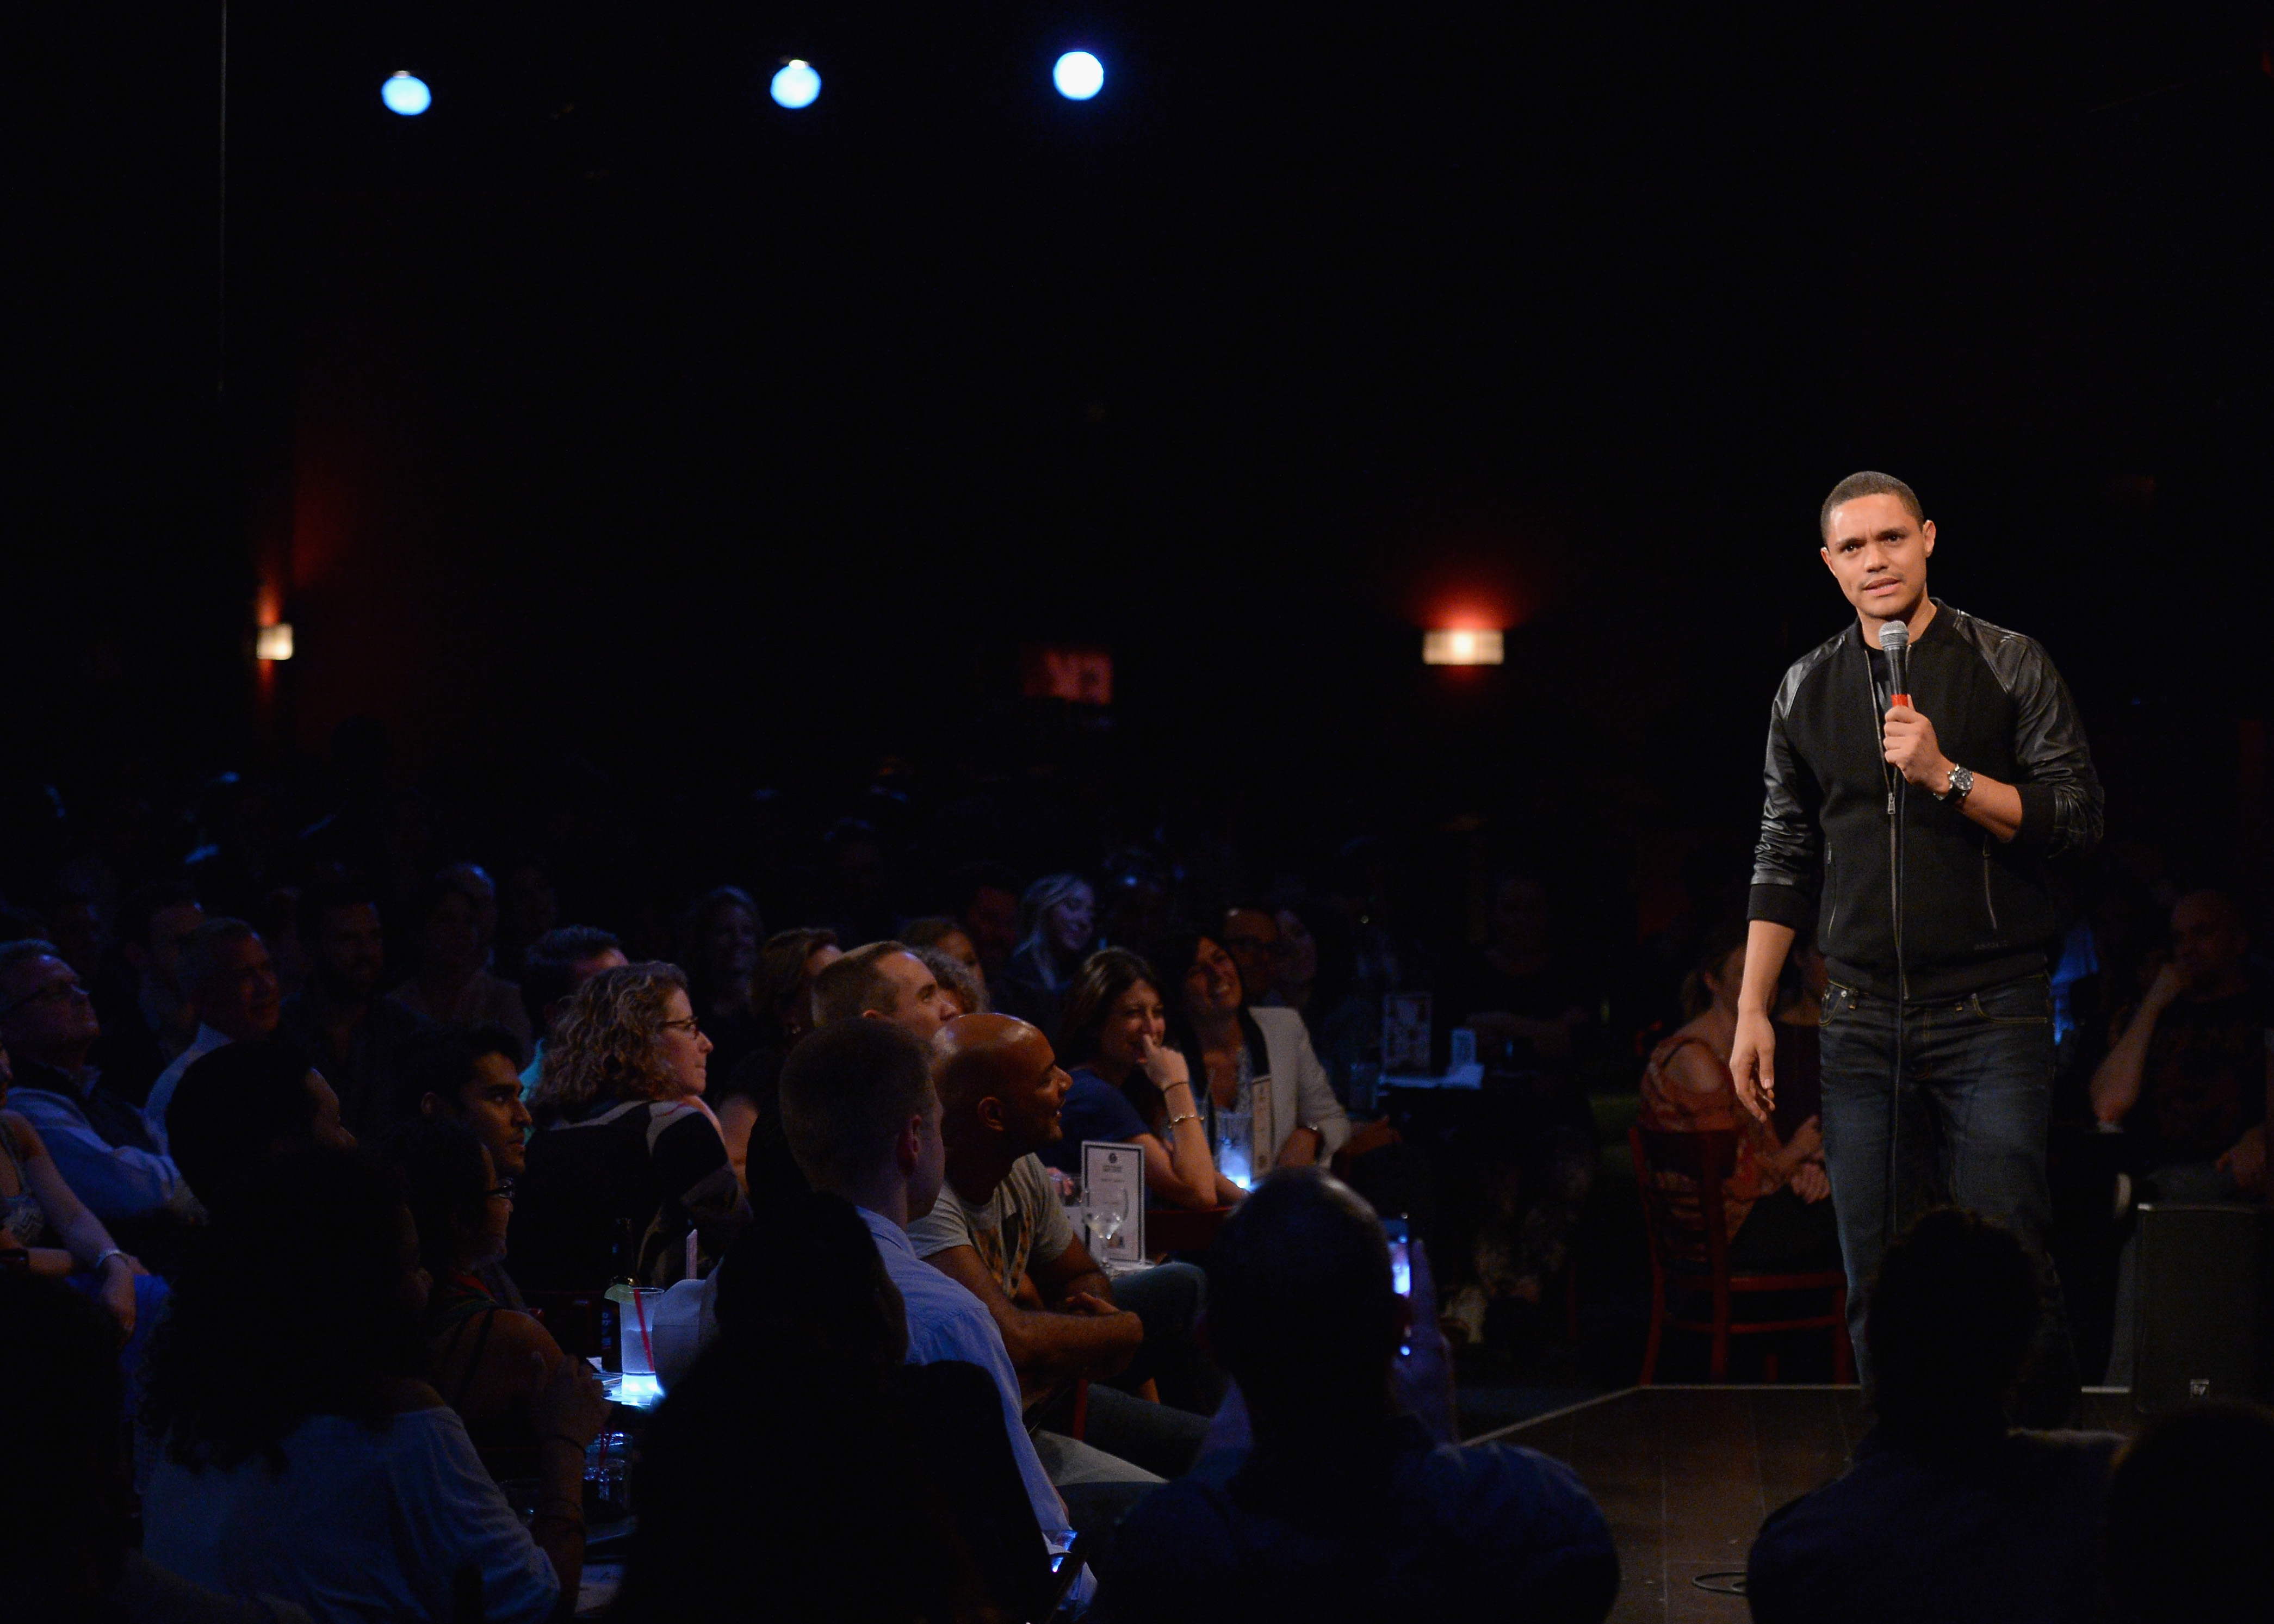 NEW YORK, NY - SEPTEMBER 29:  Comediann Trevor Noah performs onstage at Stand Up LIVE! during Advertising Week 2015 AWXII at the Gotham Comedy Club on September 29, 2015 in New York City.  (Photo by Andrew Toth/Getty Images for AWXII) (Andrew Toth—Getty Images)